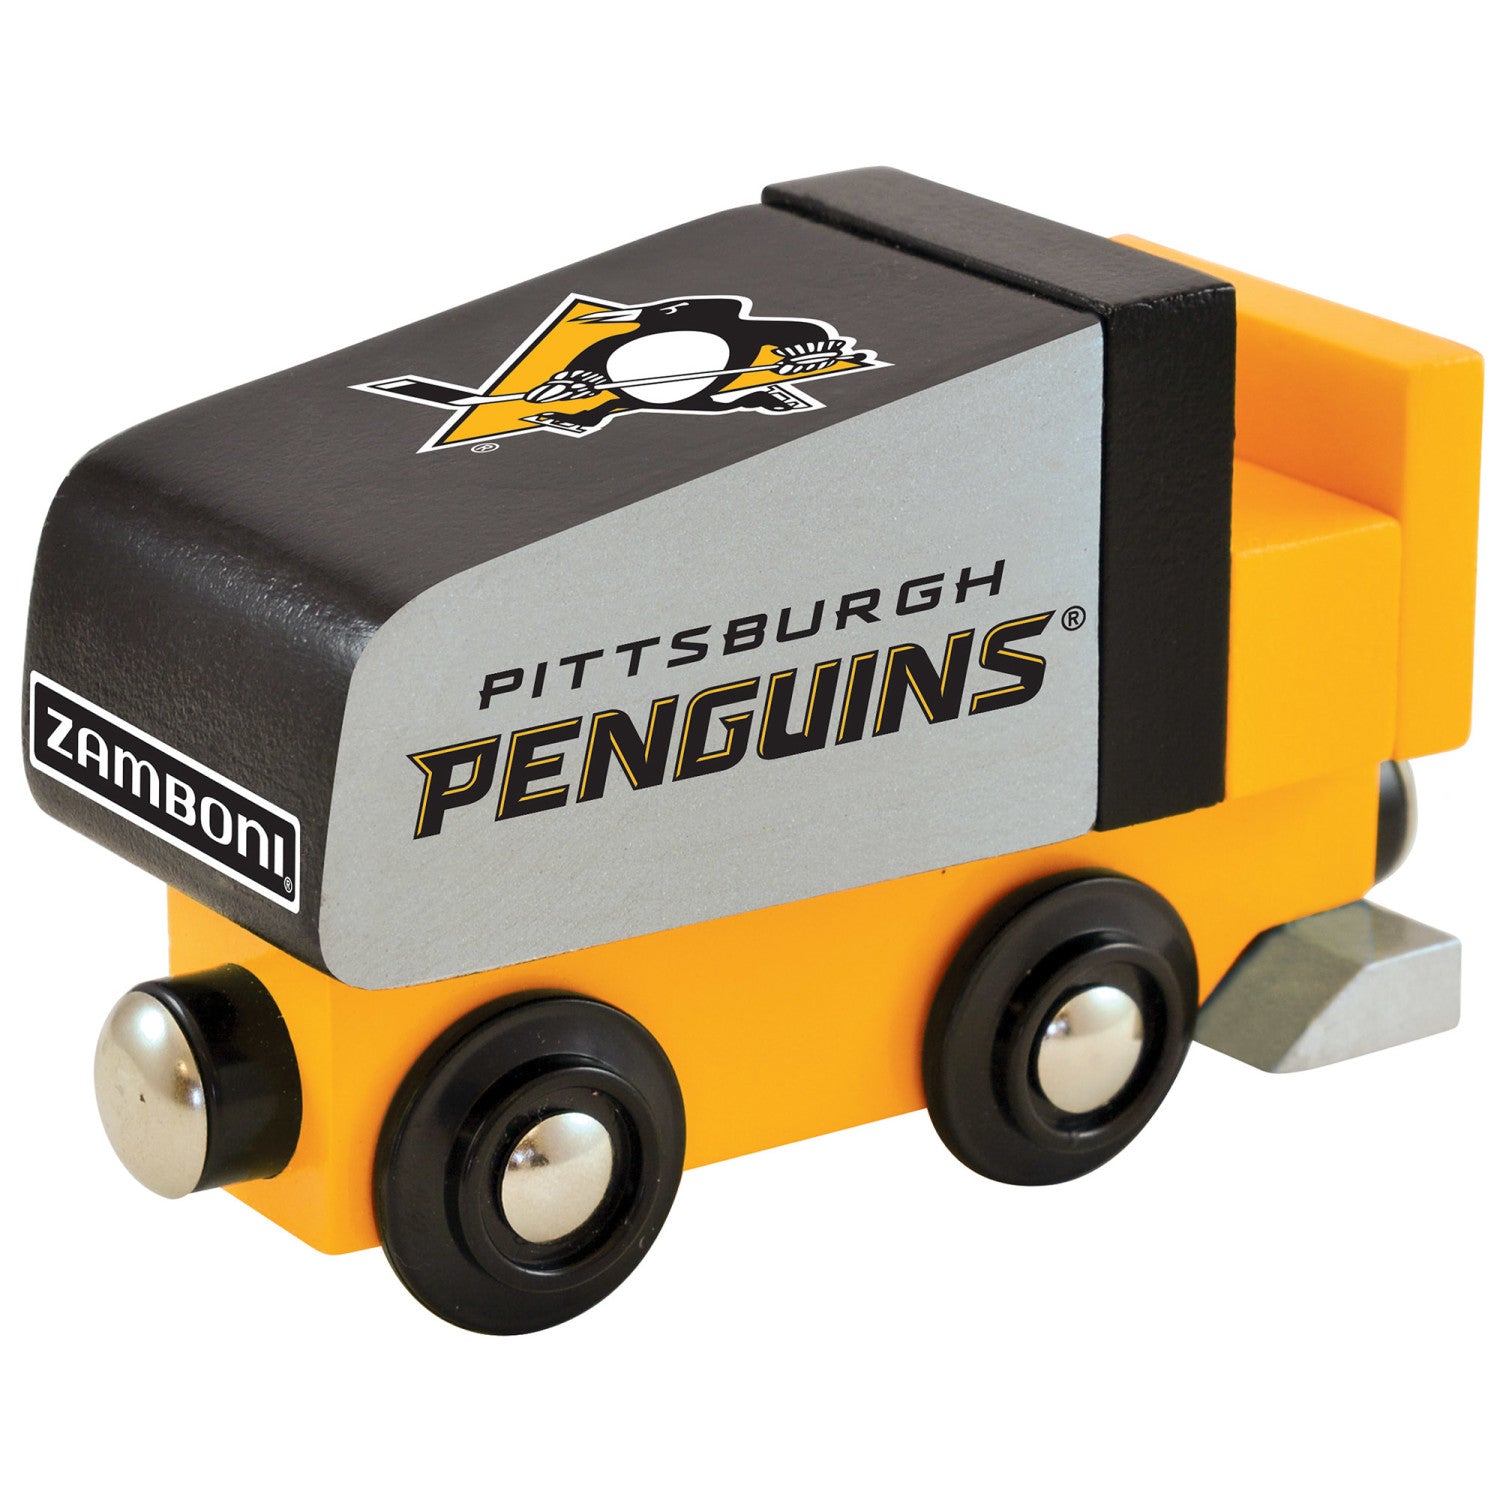 Pittsburgh Penguins Toy Train Engine